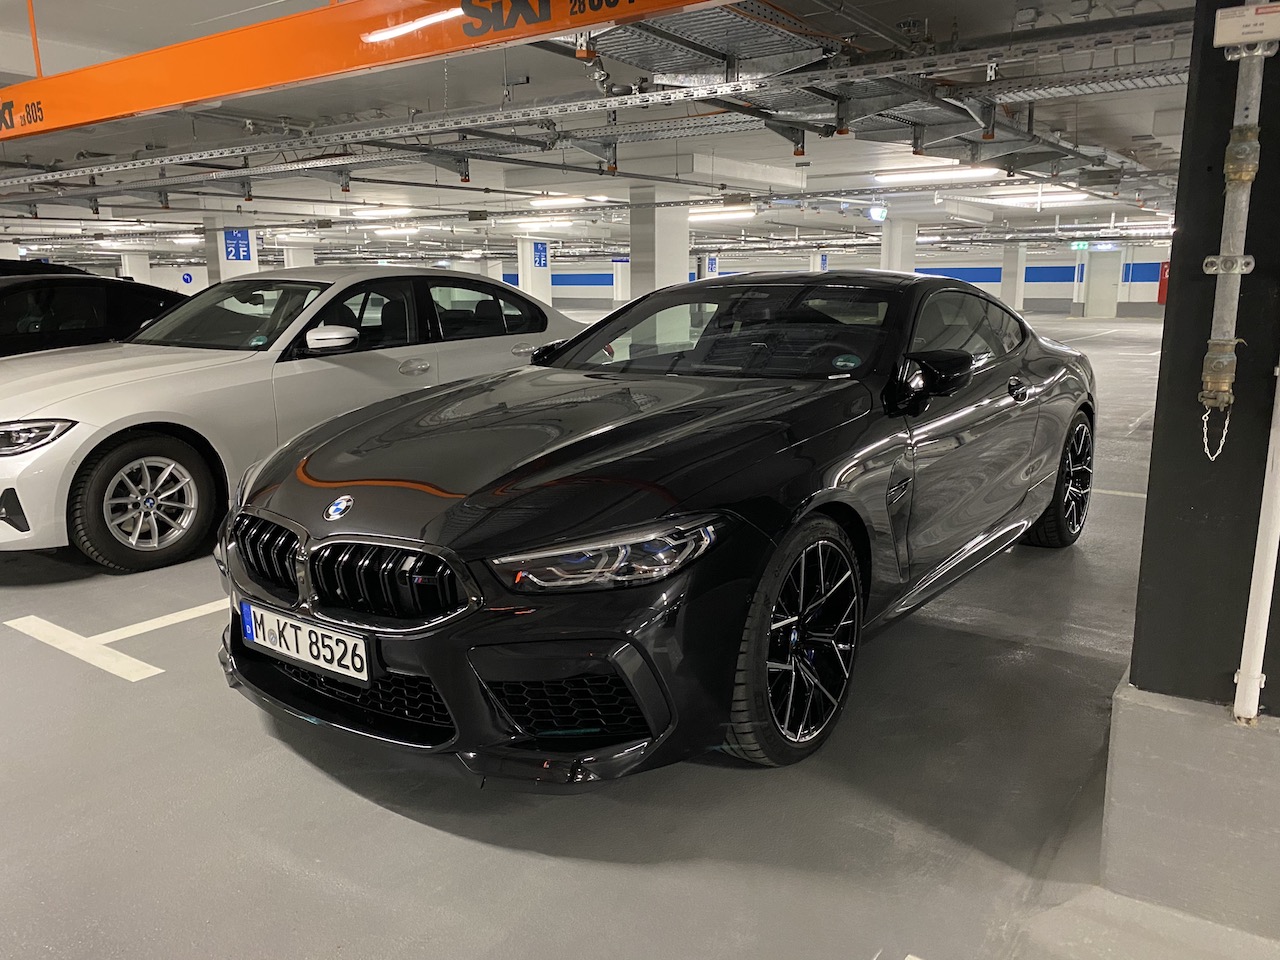 SIXT_BMW M8 Coupe.JPG